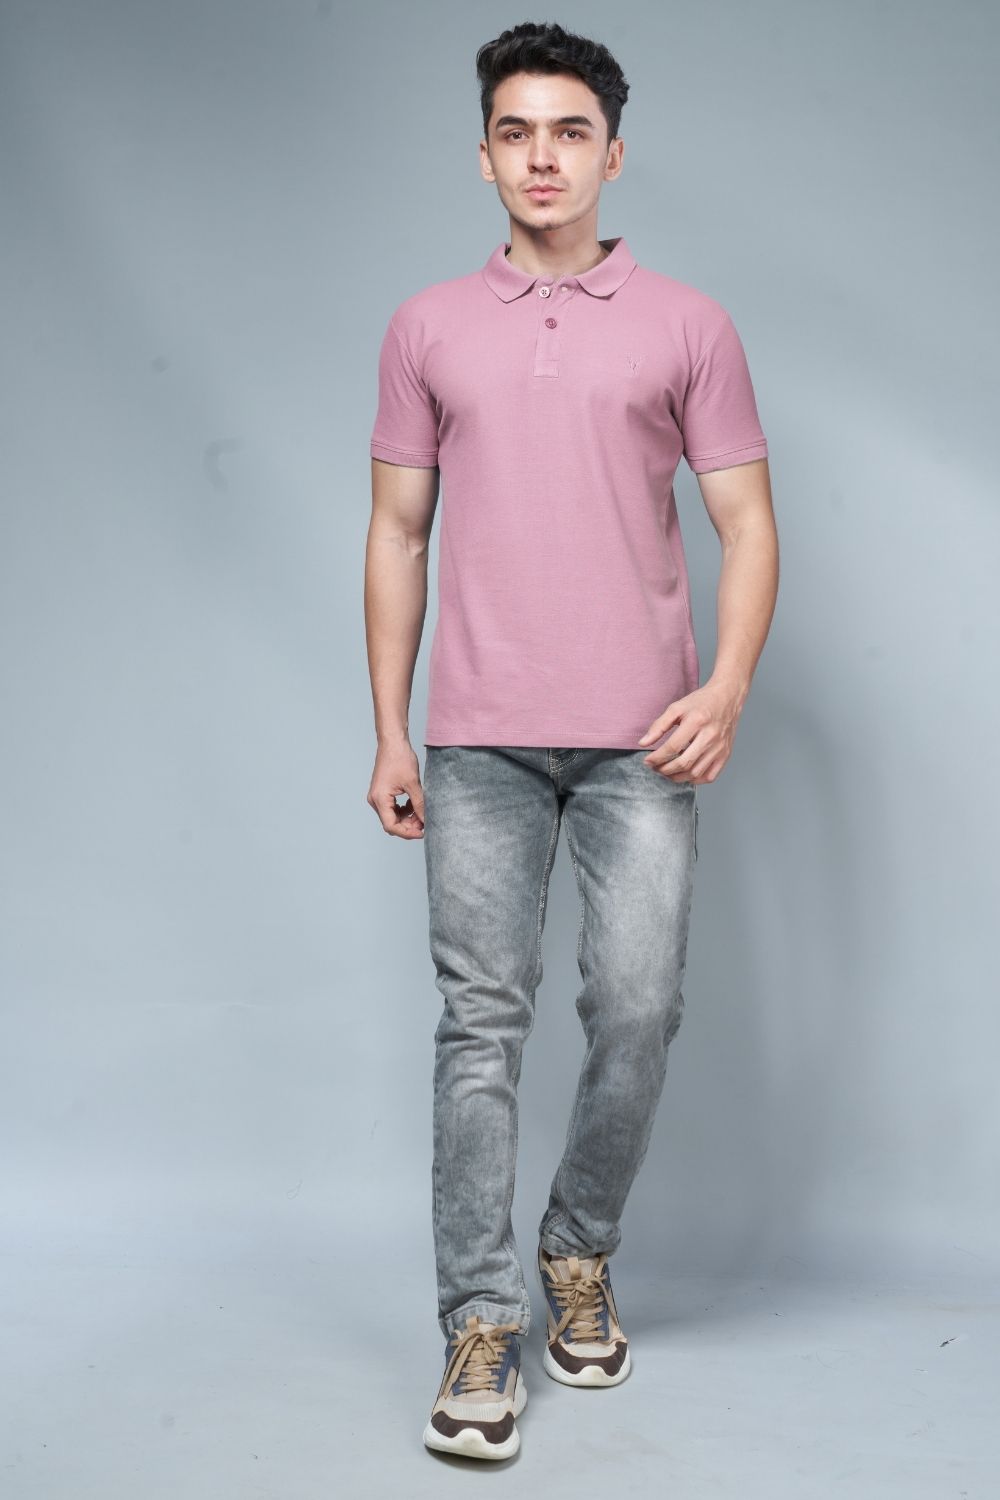 Salmon Pink colored, identity Polo T-shirts for men with collar and half sleeves, full view.